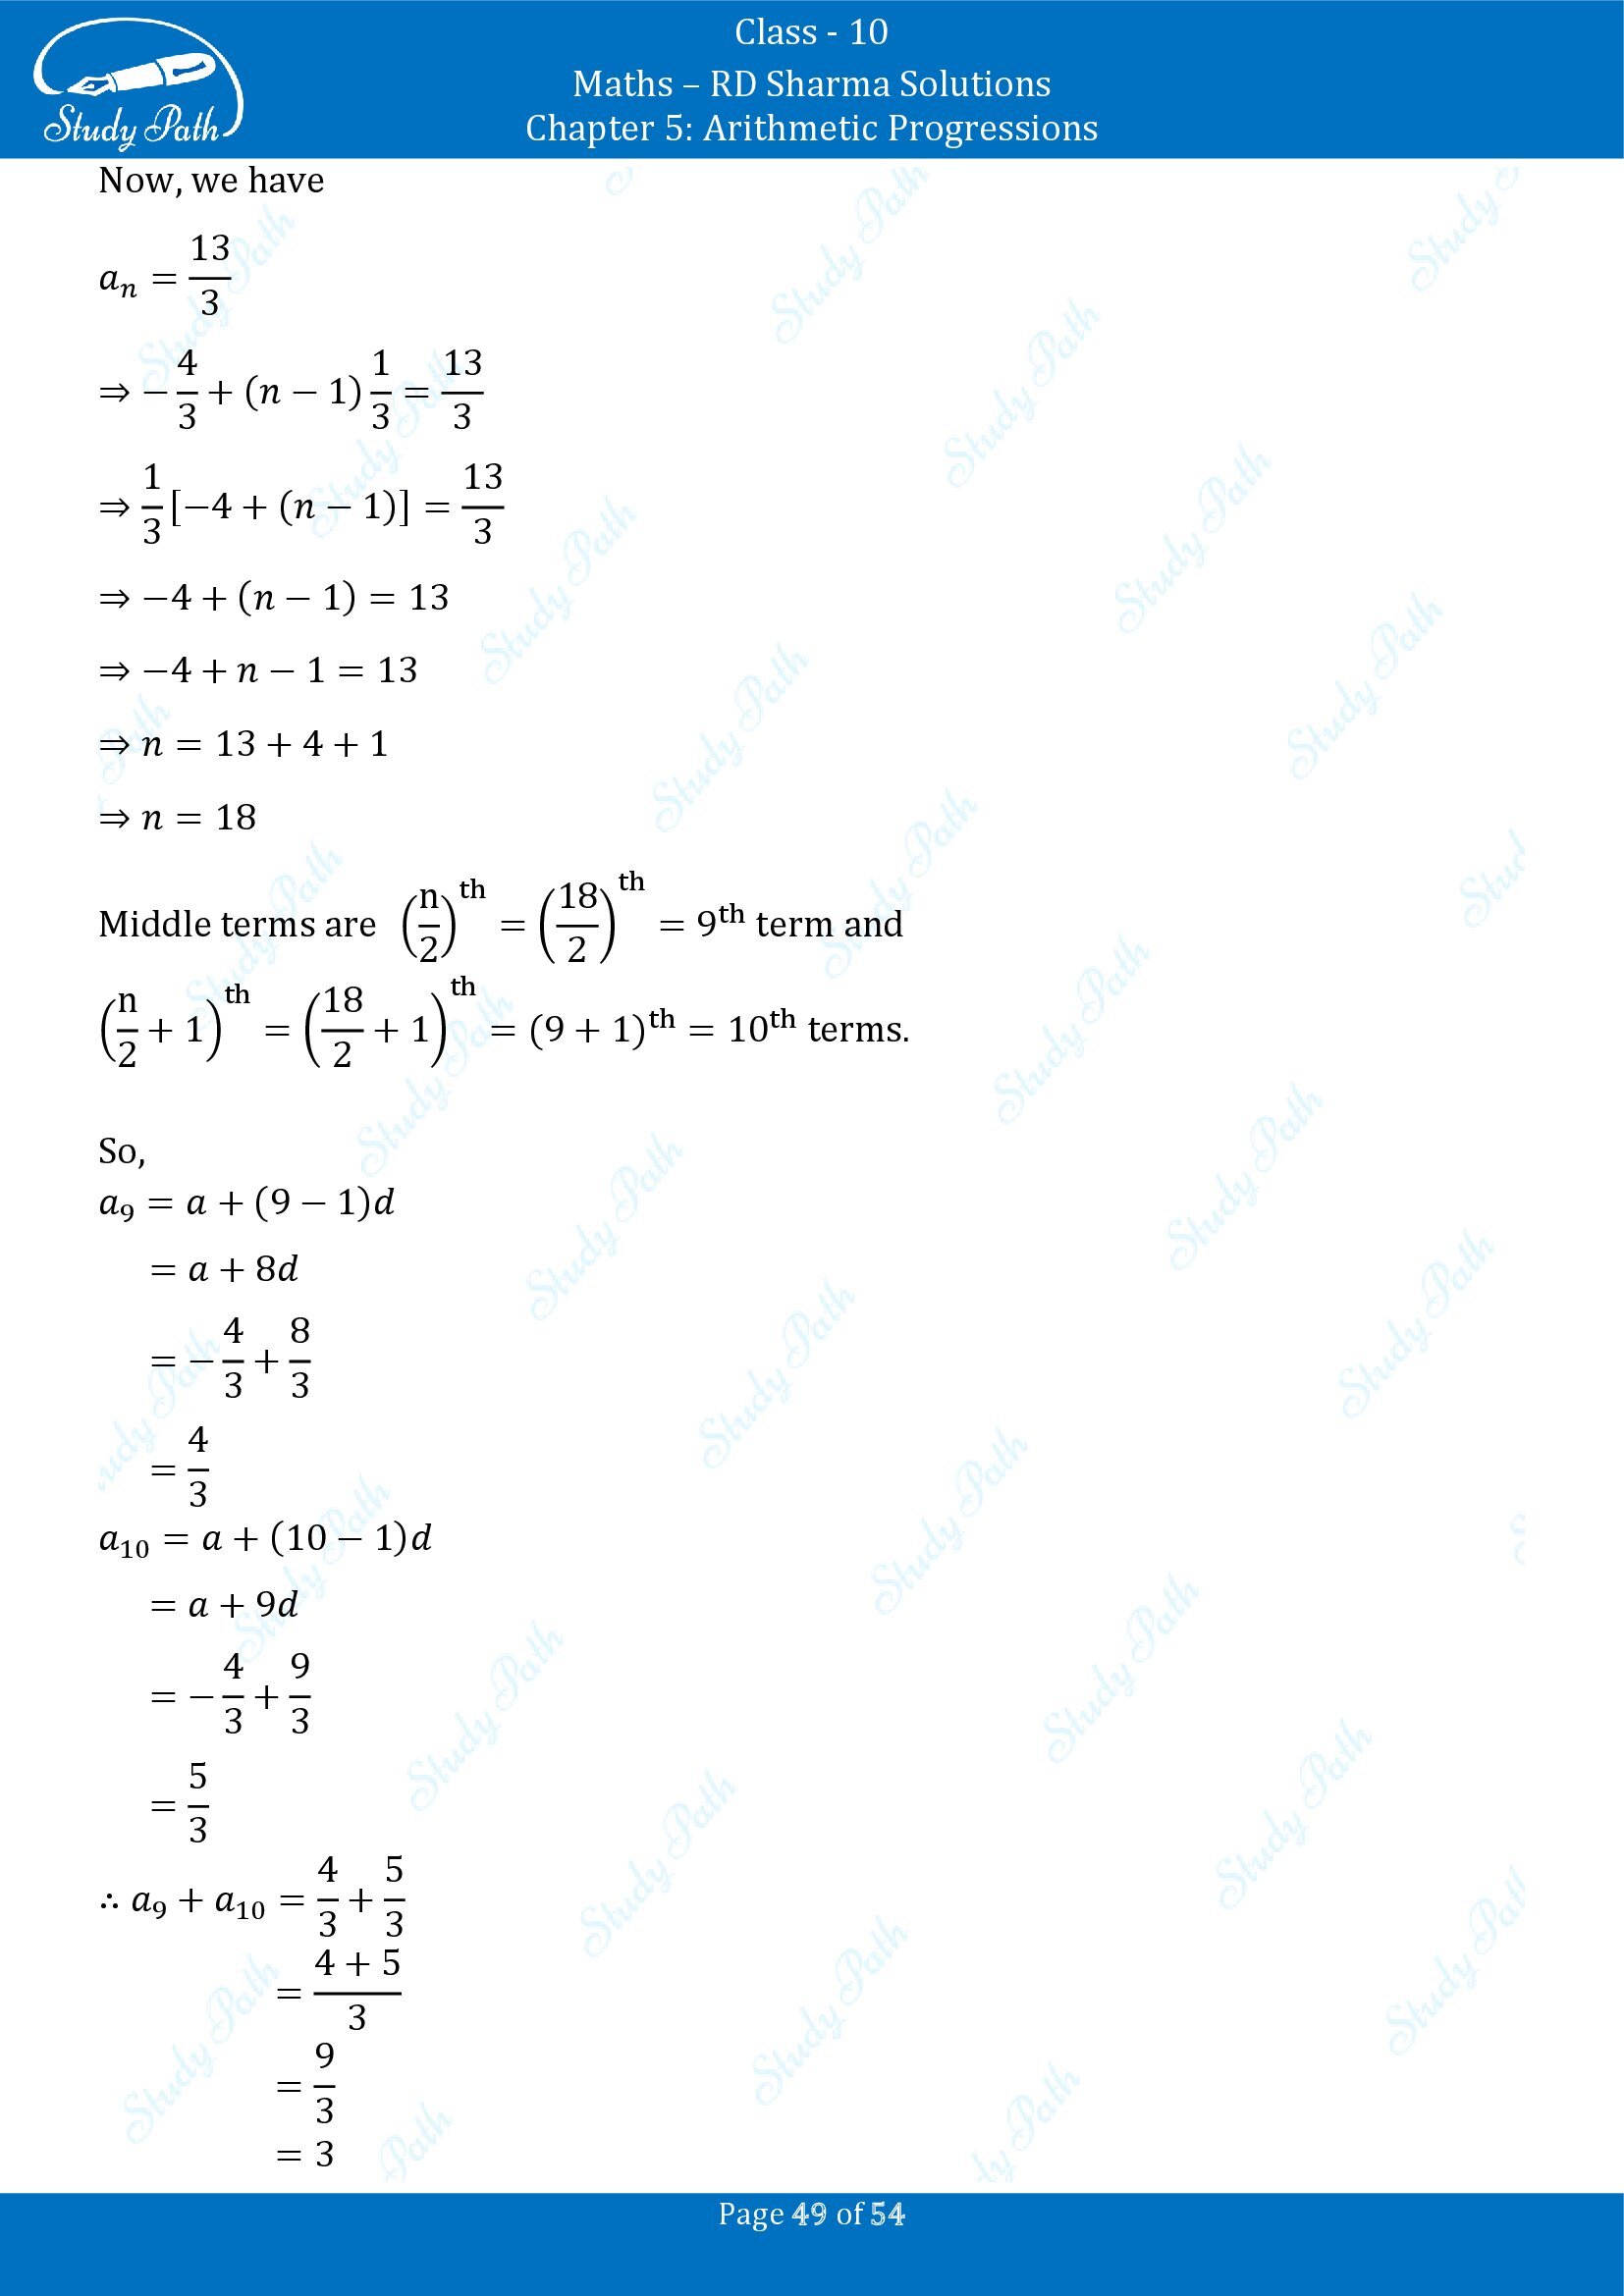 RD Sharma Solutions Class 10 Chapter 5 Arithmetic Progressions Exercise 5.4 00049